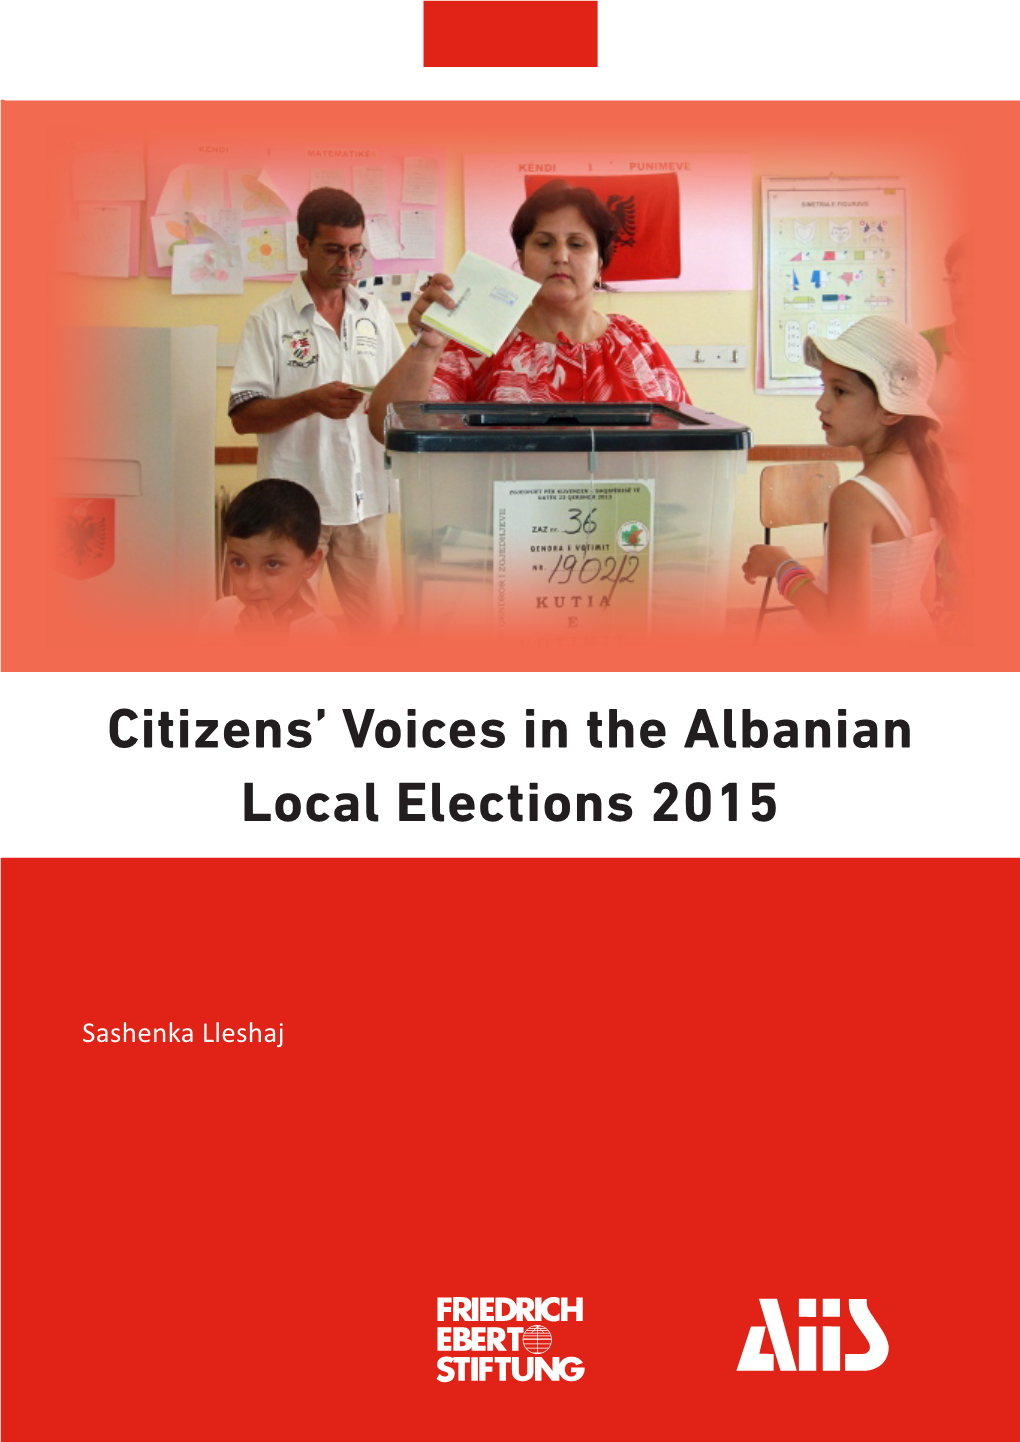 Citizens' Voices in the Albanian Local Elections 2015